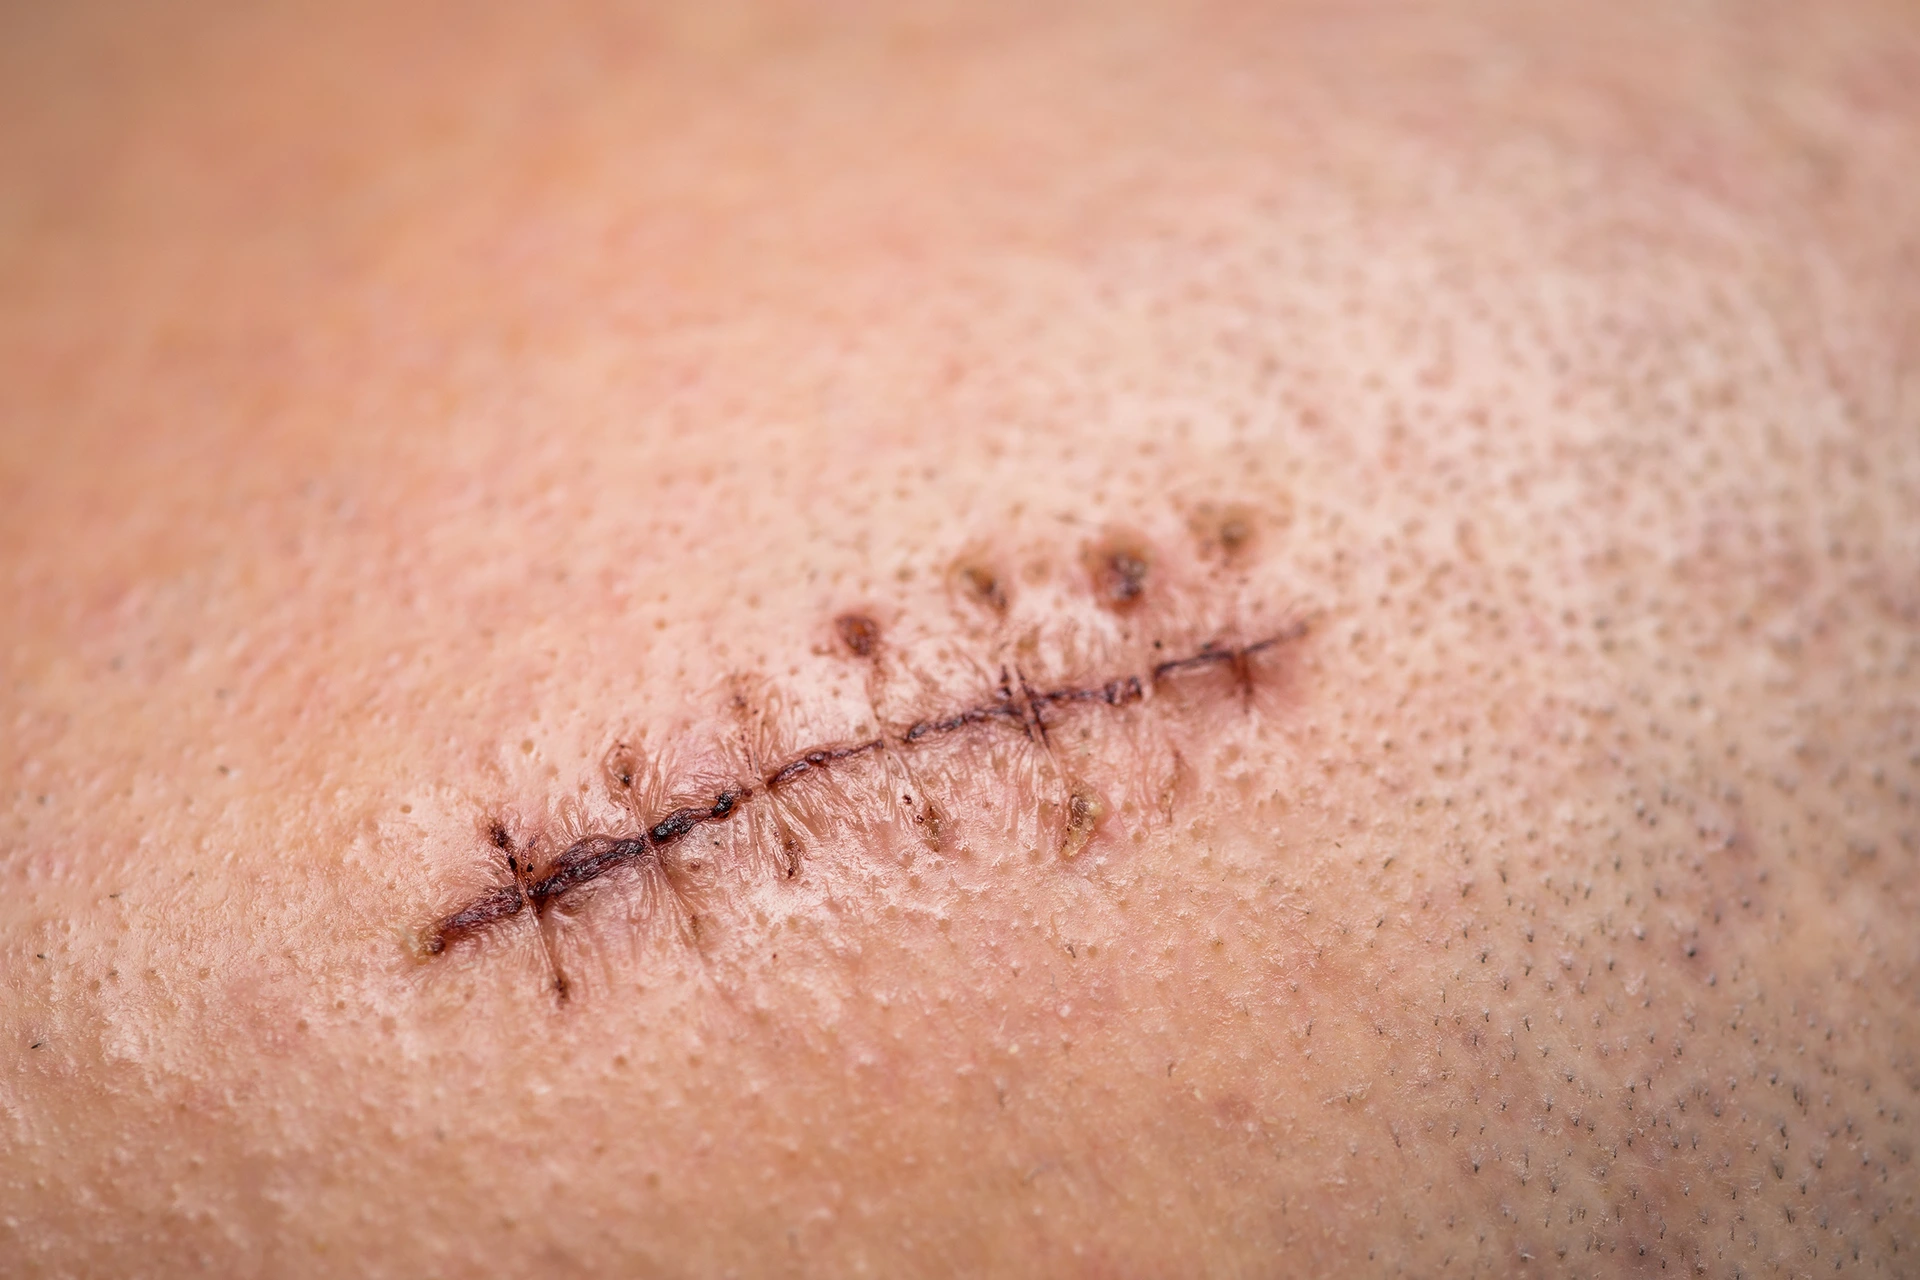 Close-up of skin showing a stitched surgical wound with slight bruising around the stitches.